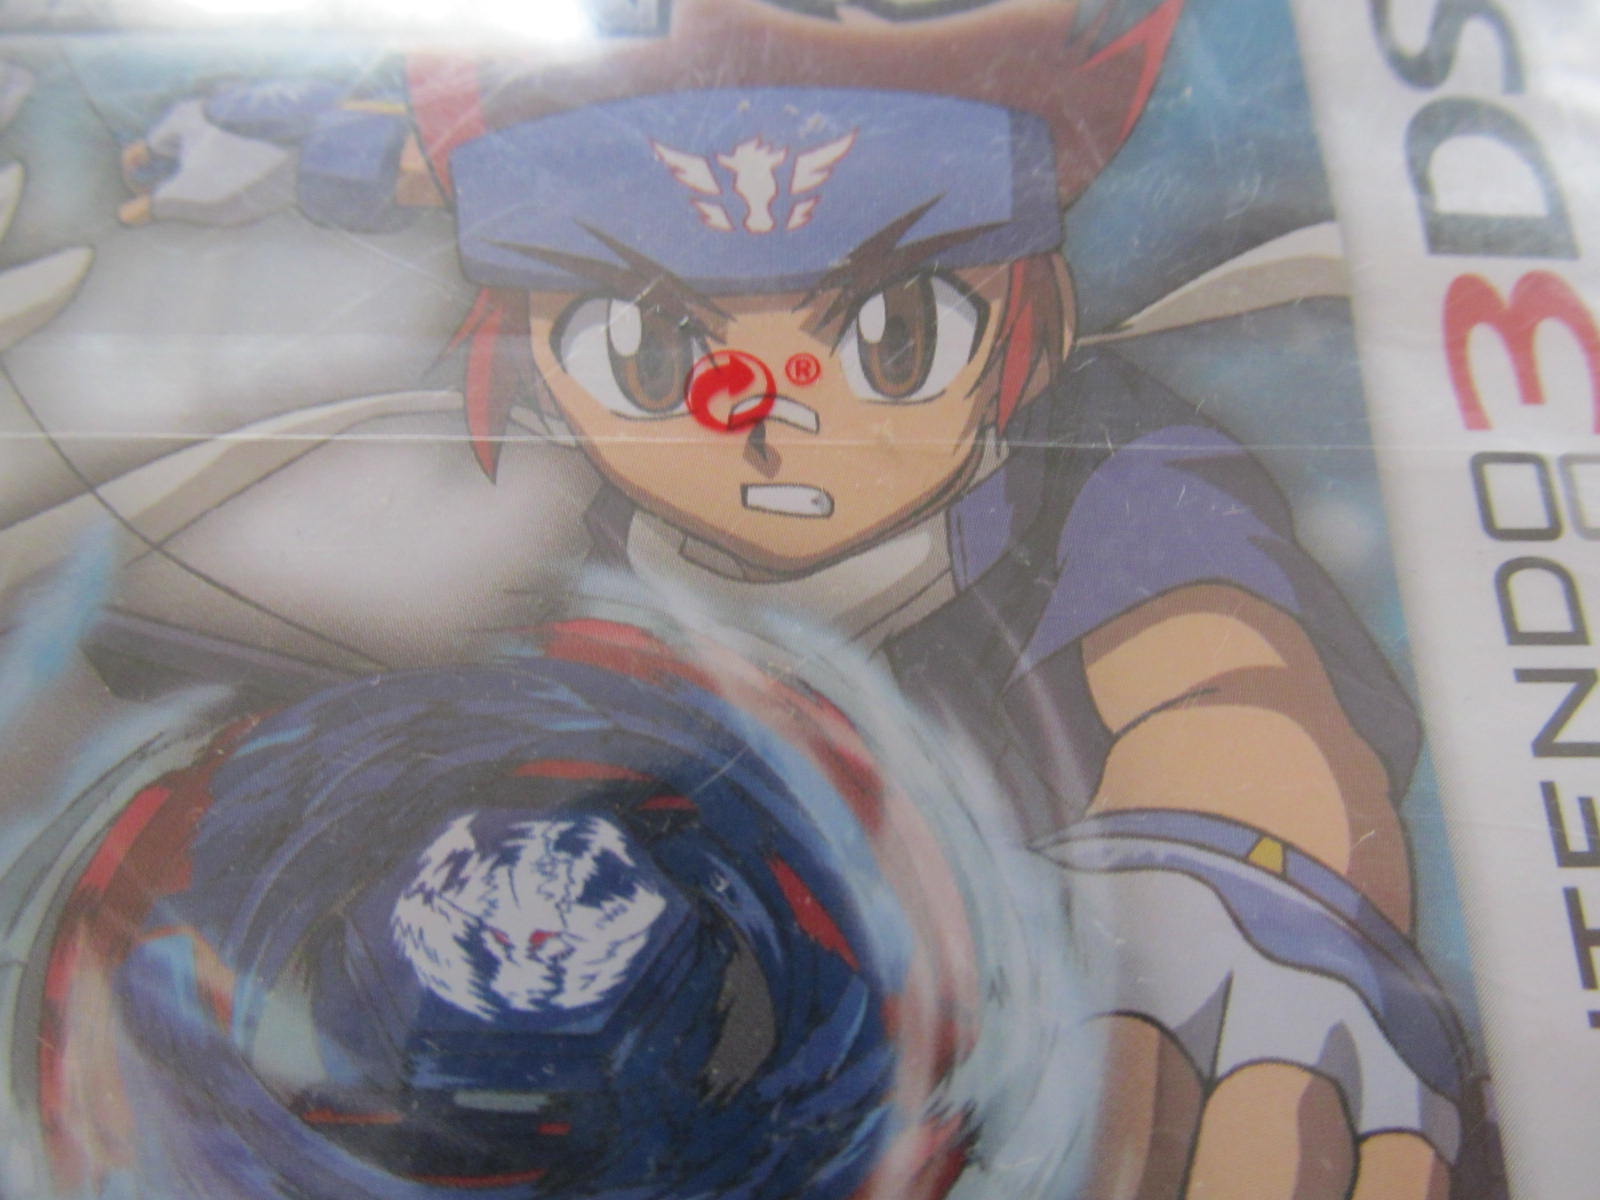 Beyblade Evolution New in Seal